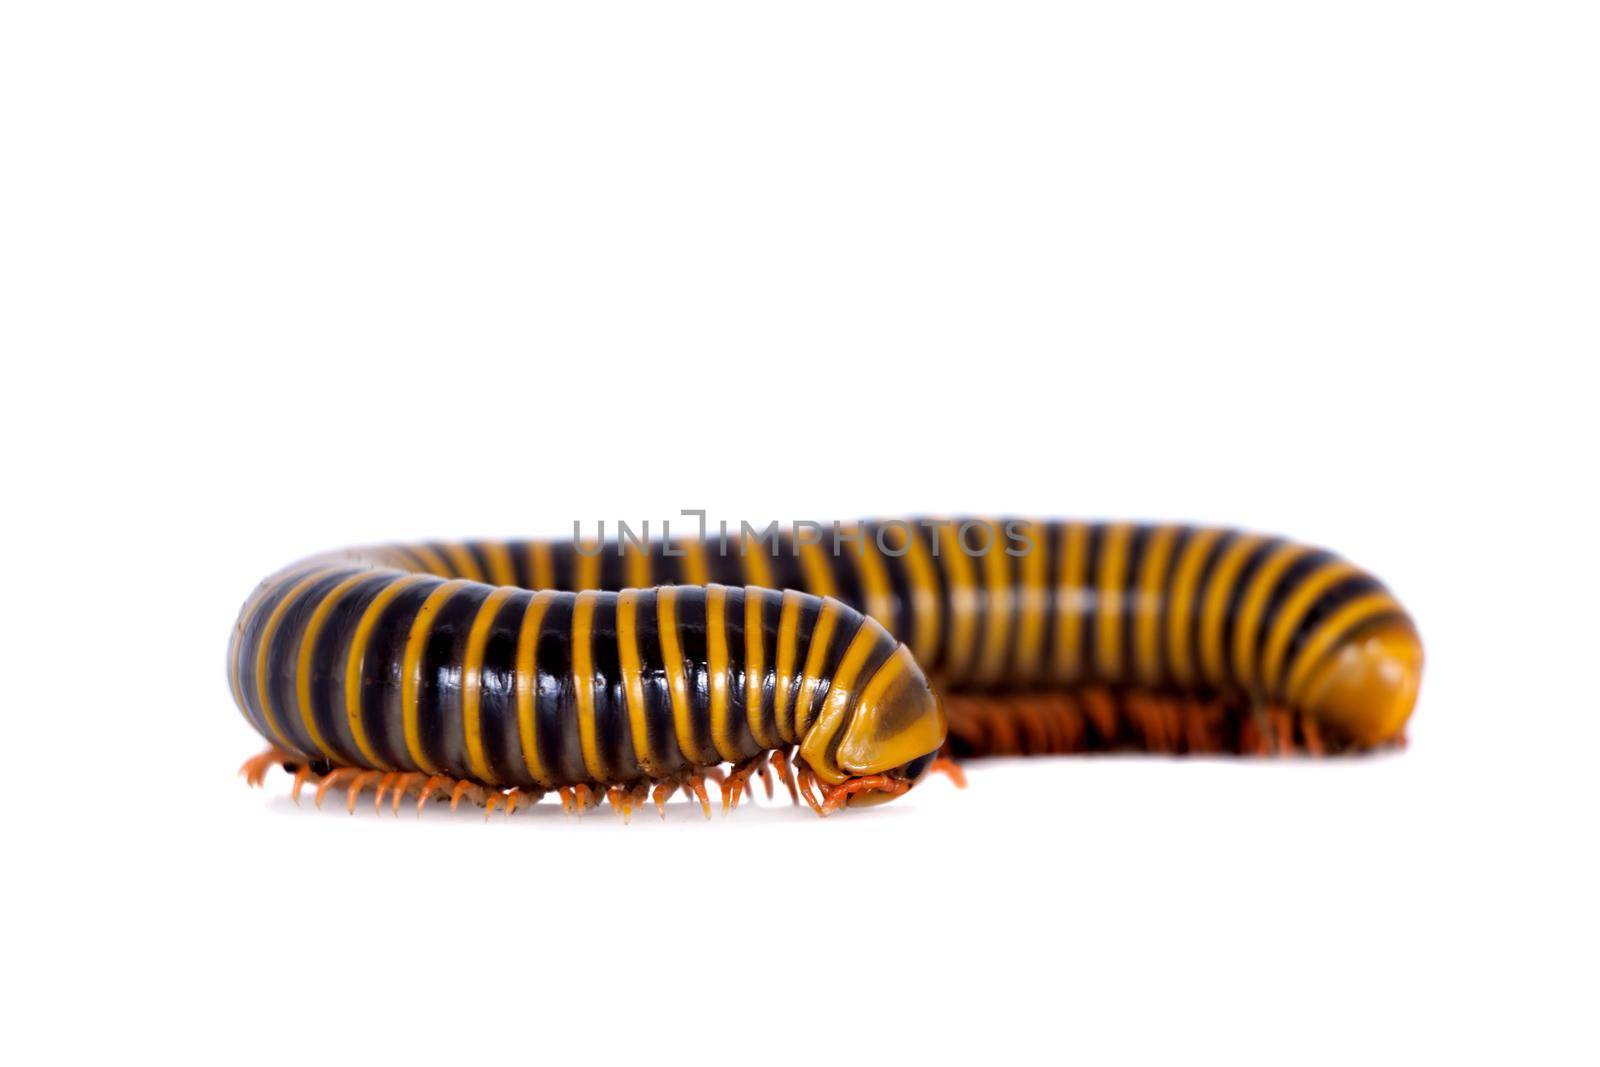 Wonderful Mexican millipede isolated on white background